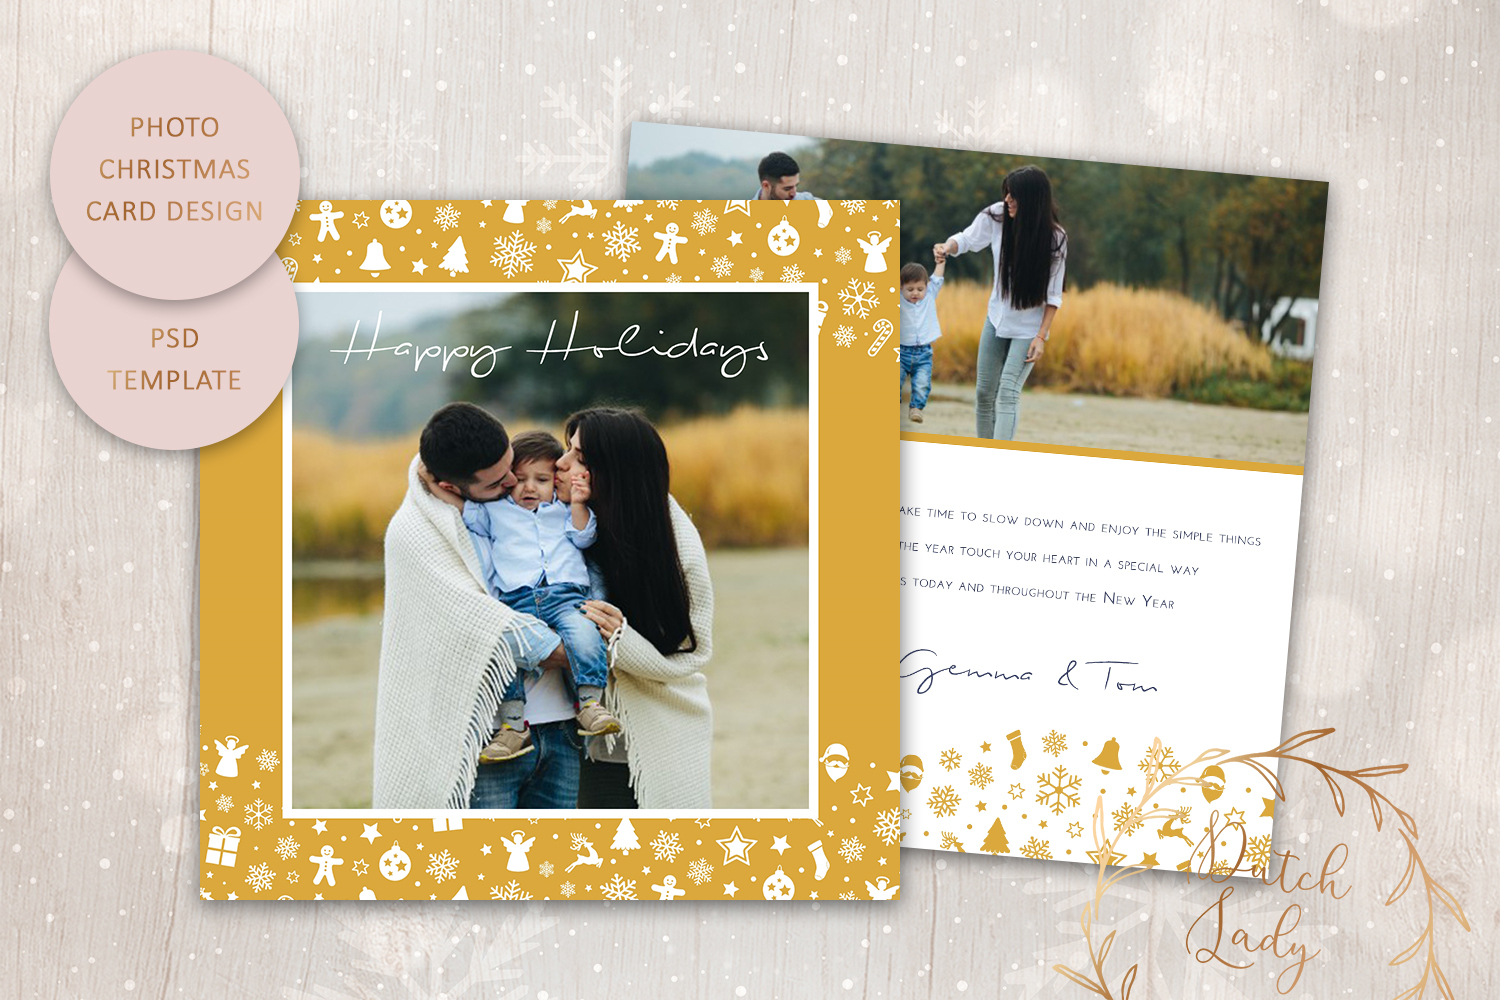 Psd Christmas Photo Card Template 7 – Vsual For Holiday Card Templates For Photographers